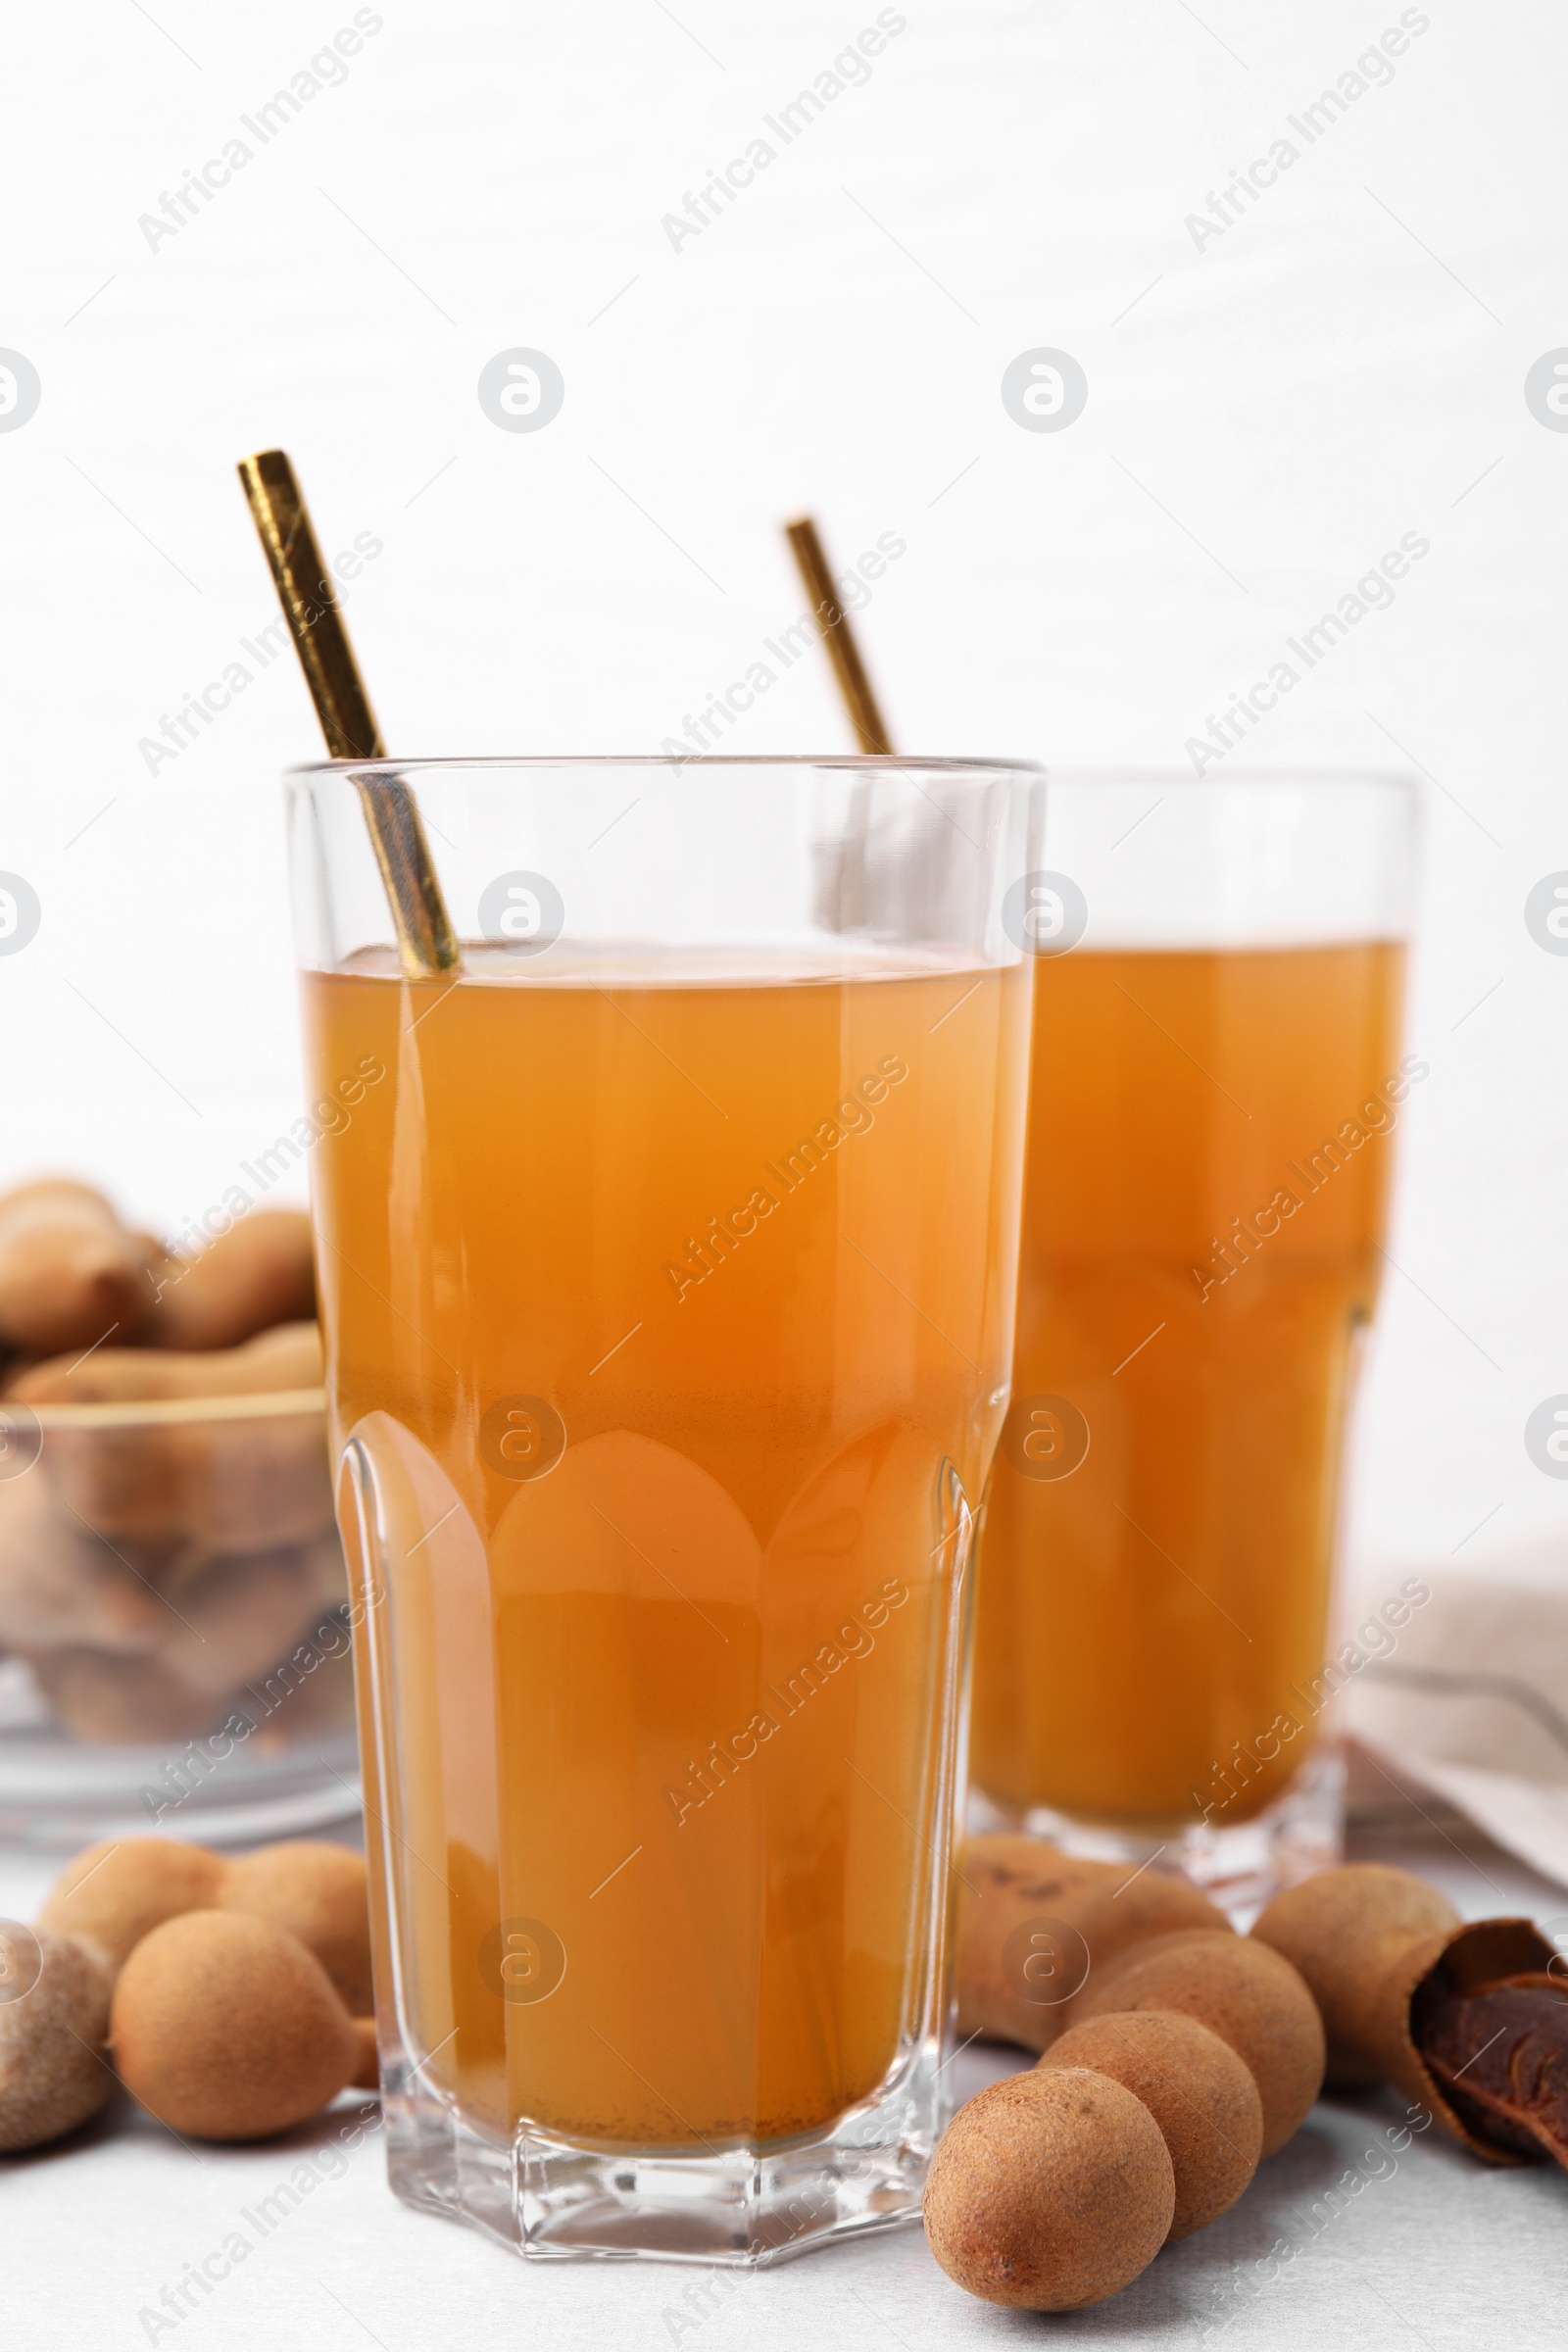 Photo of Tamarind juice and fresh fruits on white table